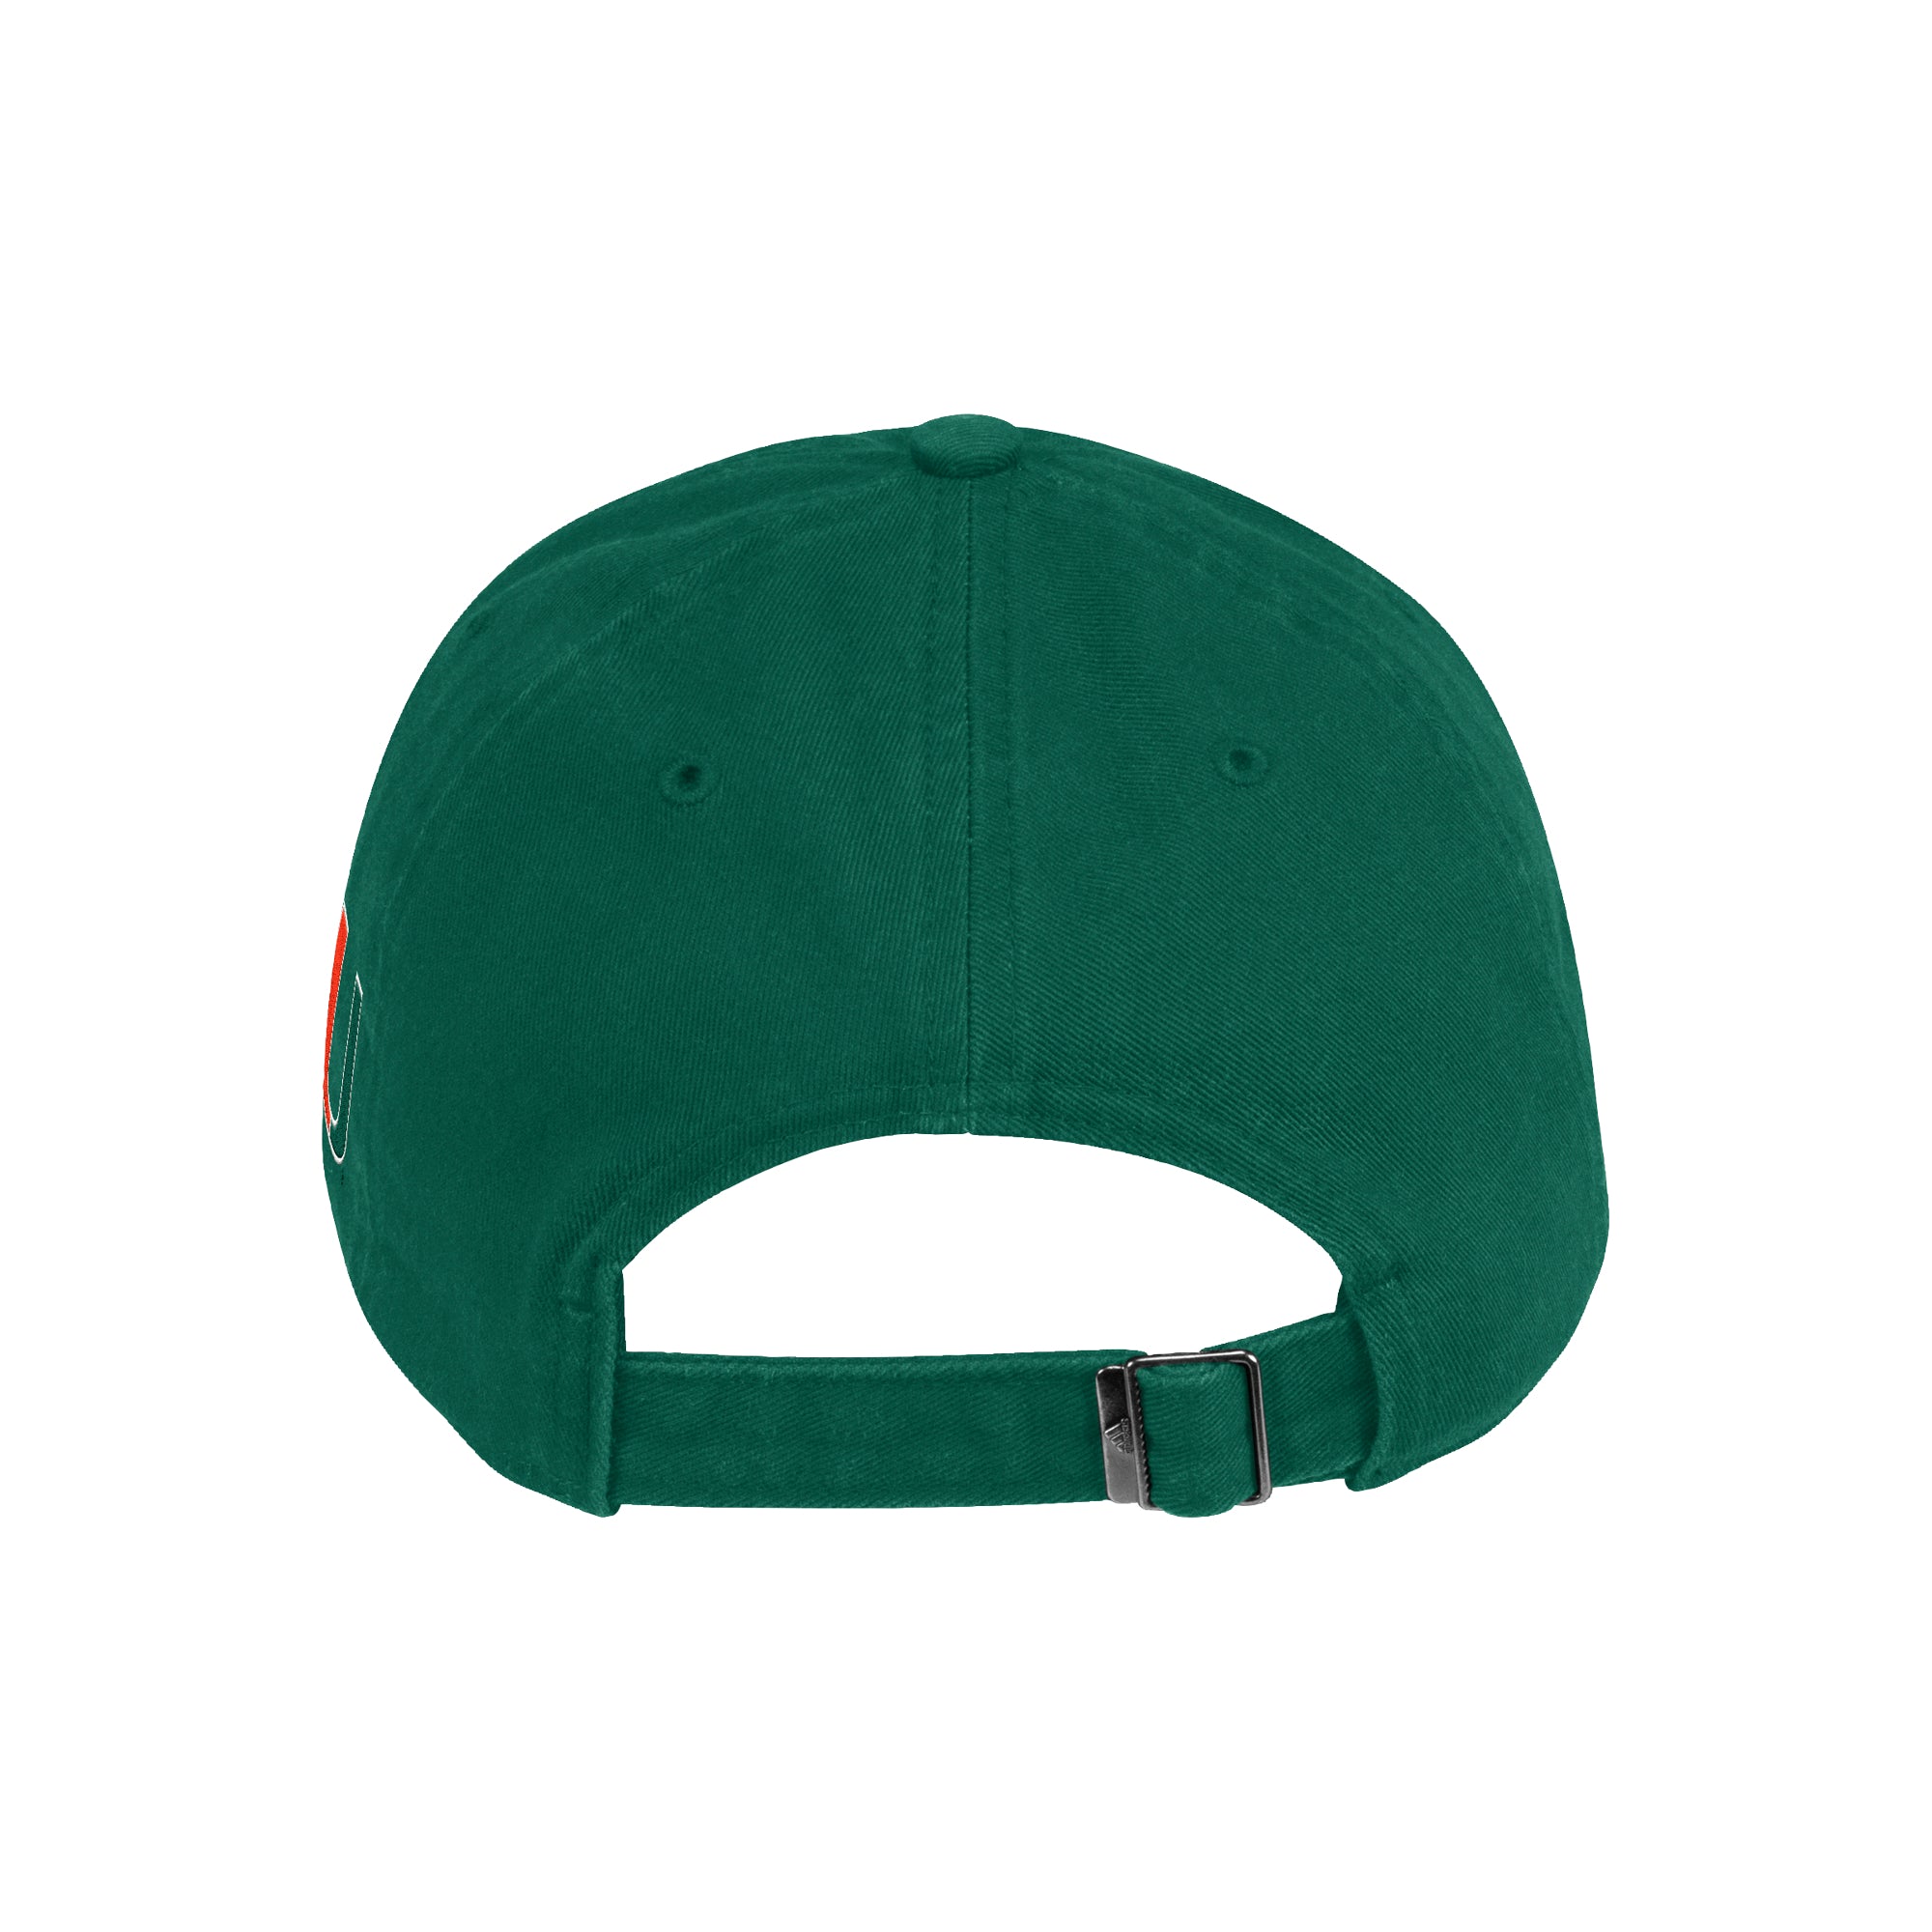 Miami Hurricanes adidas BOS Cotton Slouch Hat- Green